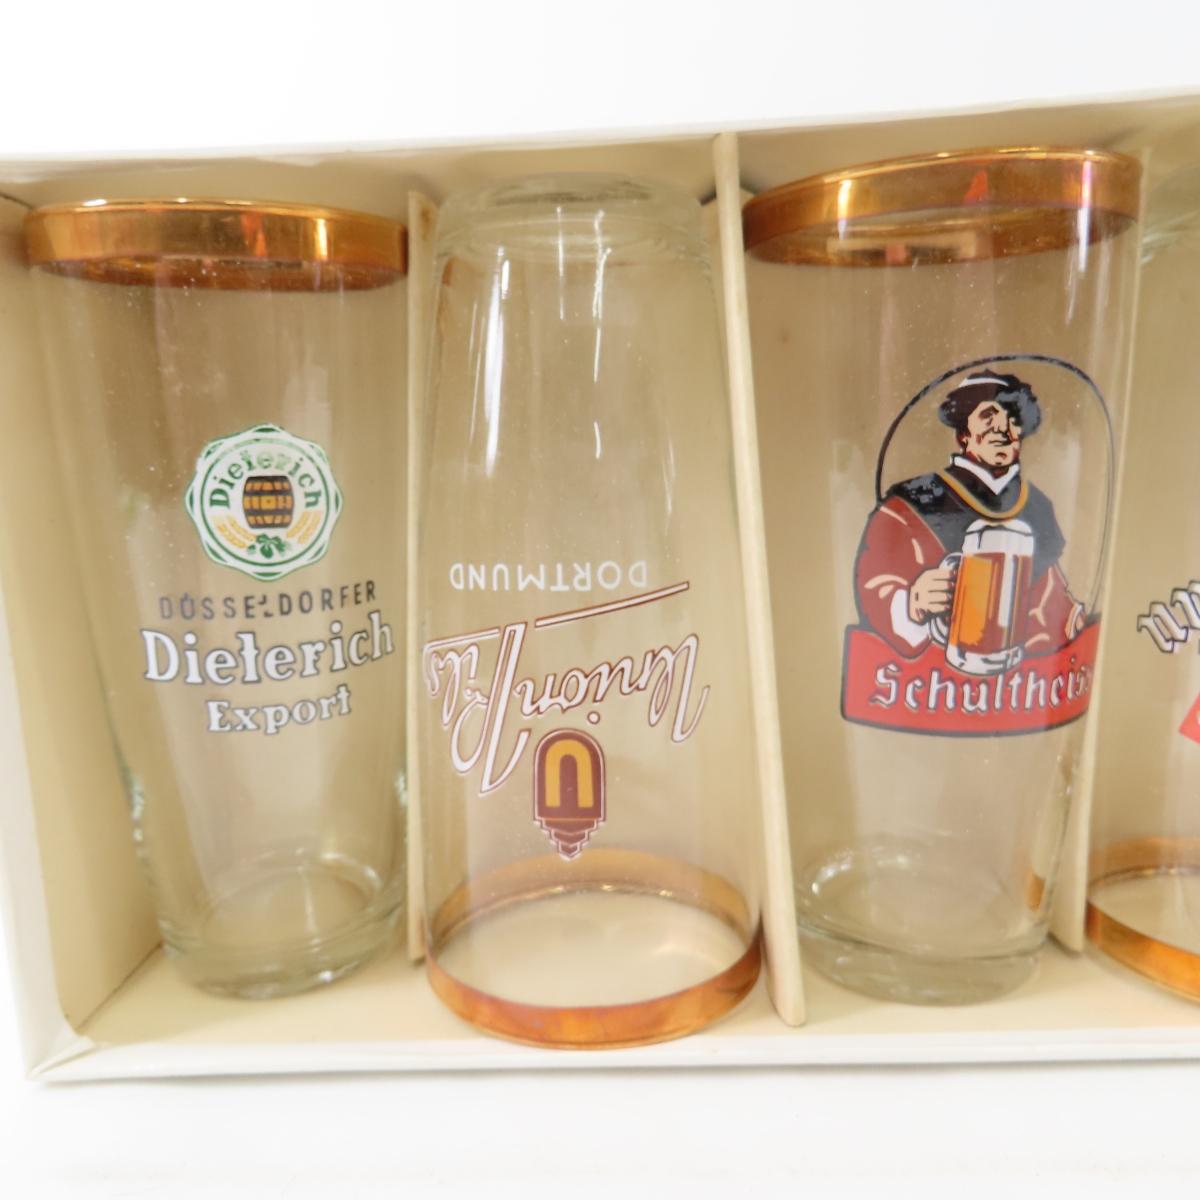 2 sets of 6 German beer glasses by Ruhrglass